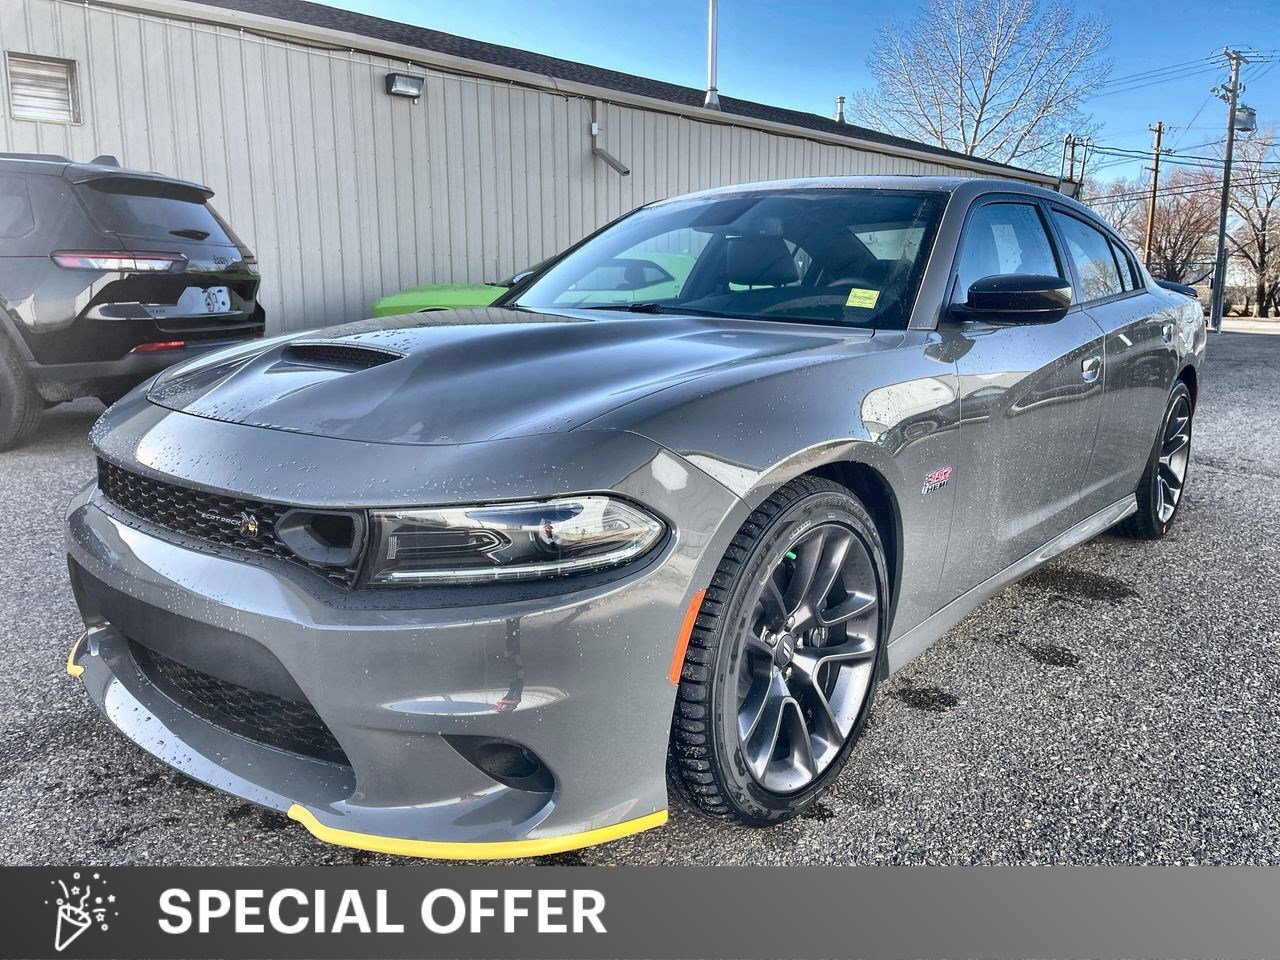 2023 Dodge Charger Scat Pack 392 | 4G LTE Wi Fi hot spot